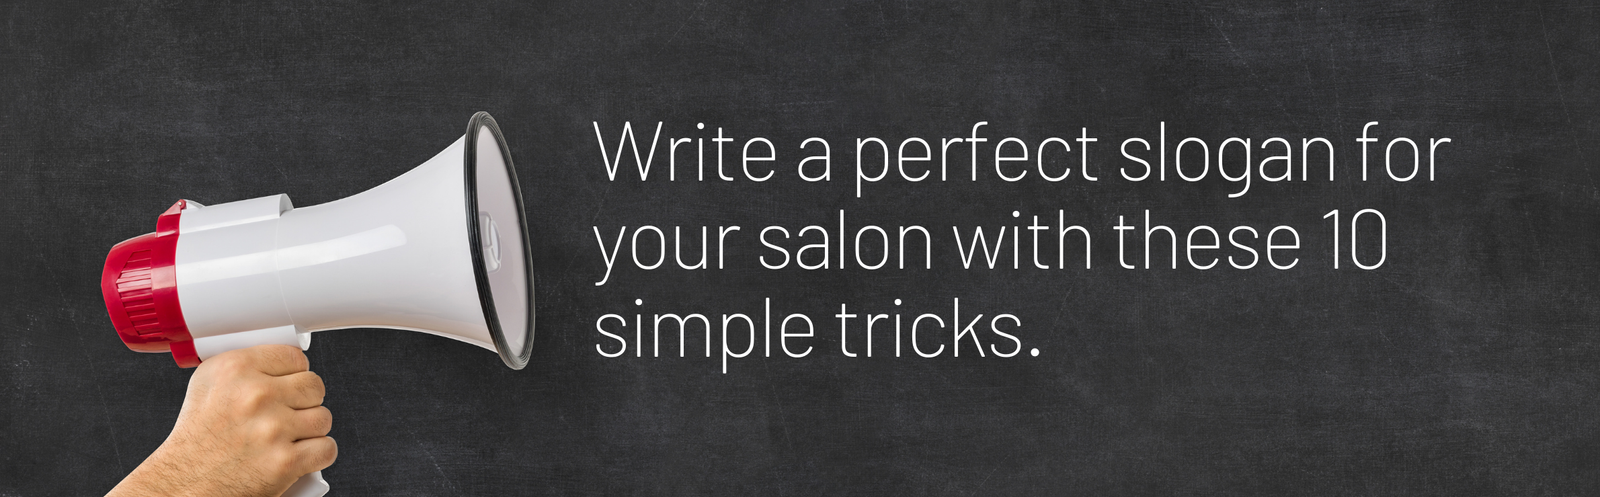 Write a perfect slogan for your salon with these 10 simple tricks.